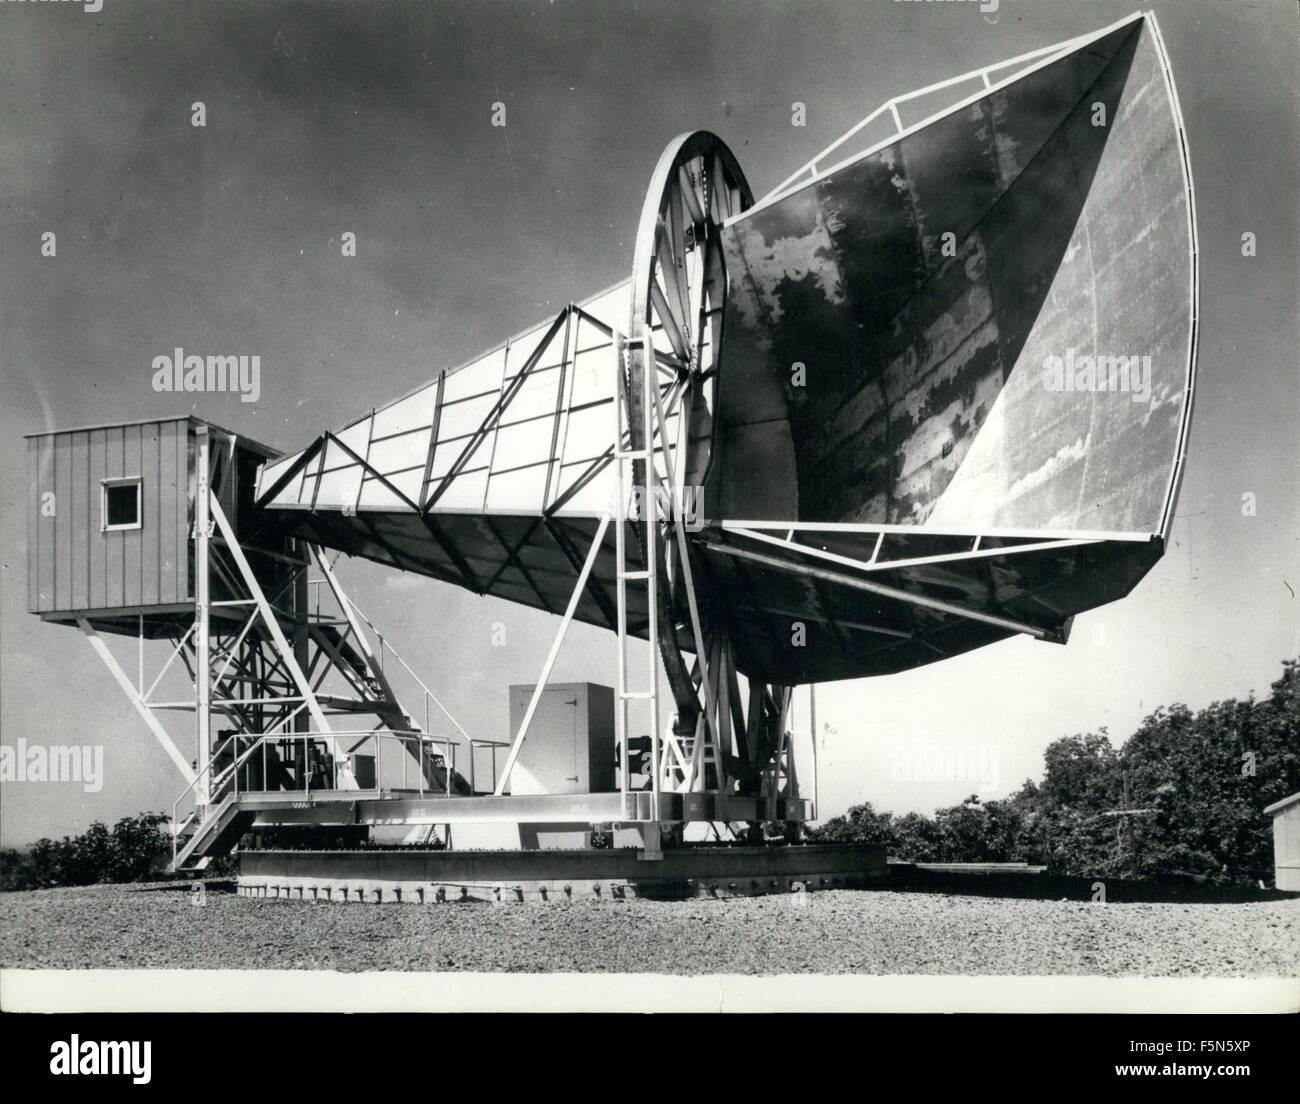 1968 - Giant ear trumpet for outer space.: This large ''ear trumpet'' is one of the world's most sensitive sound receivers. Built to capture sounds from outer space the 50-ft-long revolving antenna is located at the U.S. Bell Telephone System's space research laboratory at Holmdel (New Jersey). The box at the end of the trumpet houses a ruby maser amplifier refrigerated to 456 degrees below zero Fahrenheit. The receiver figures prominently in the Echo and Telstar satellite projects. Its futured use is said to be of immense importance in tracking and recording distant atmospheric transmission f Stock Photo